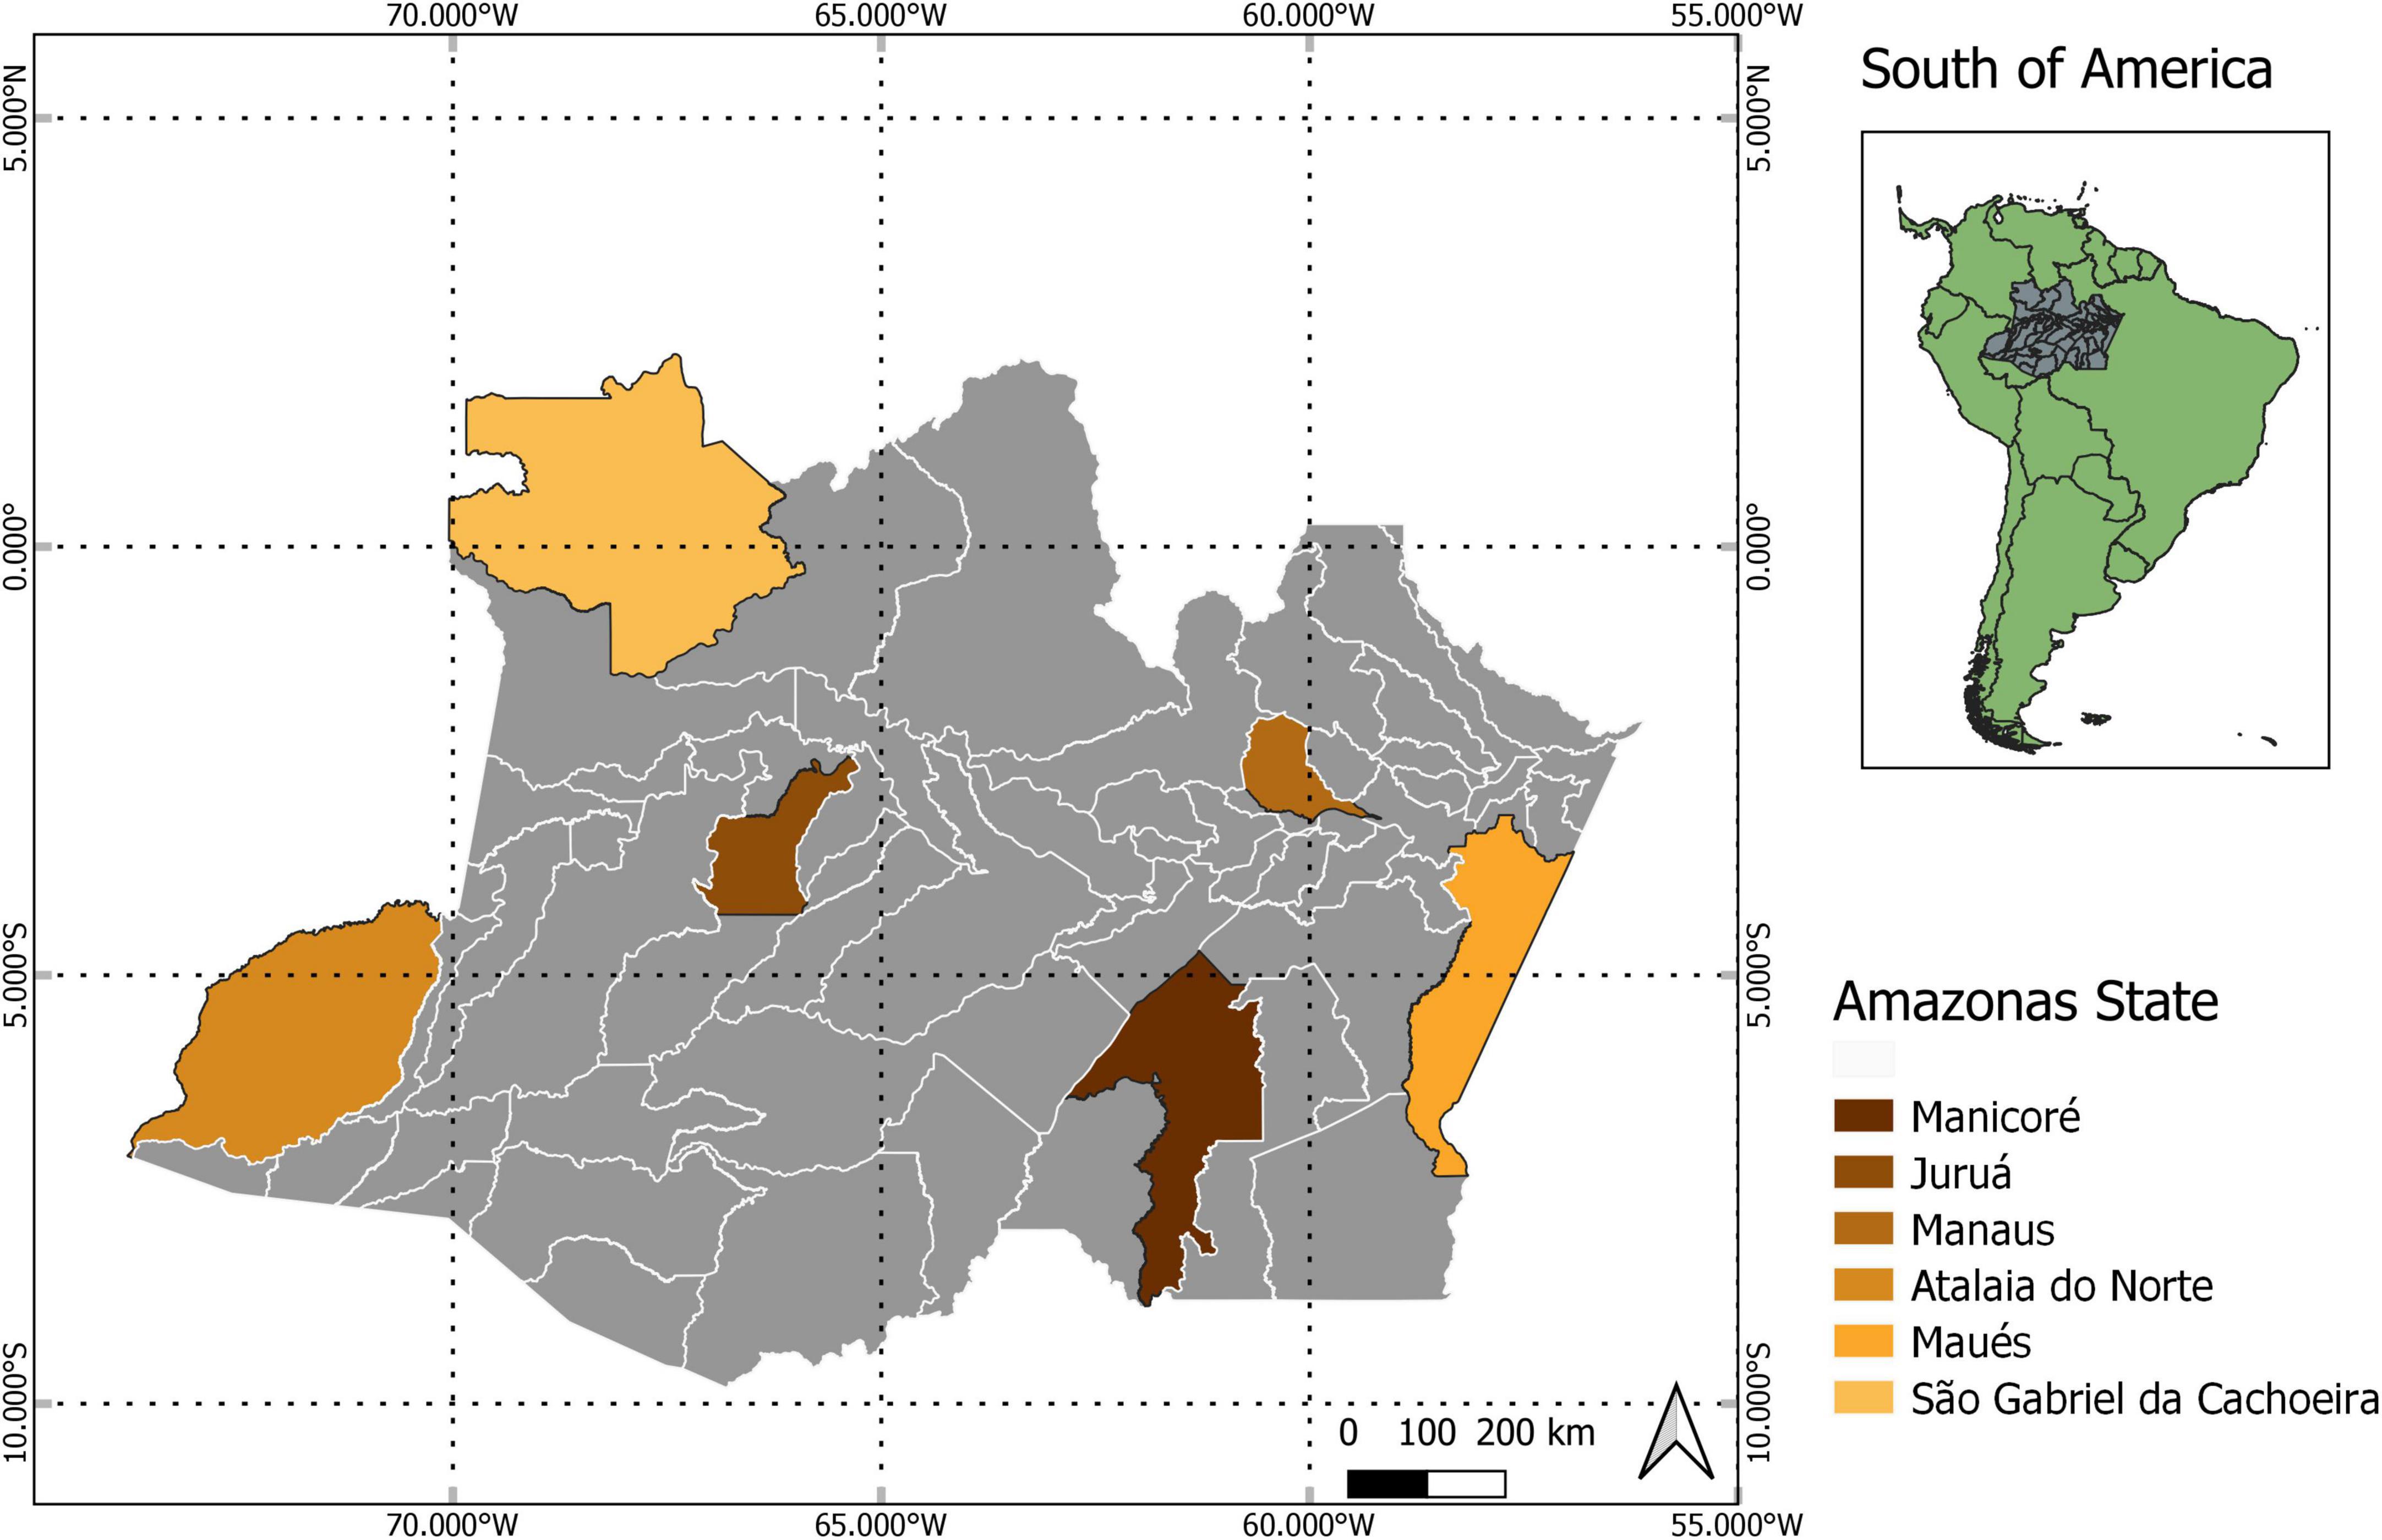 Soil fertility and drought interact to determine large variations in wood production for a hyperdominant Amazonian tree species